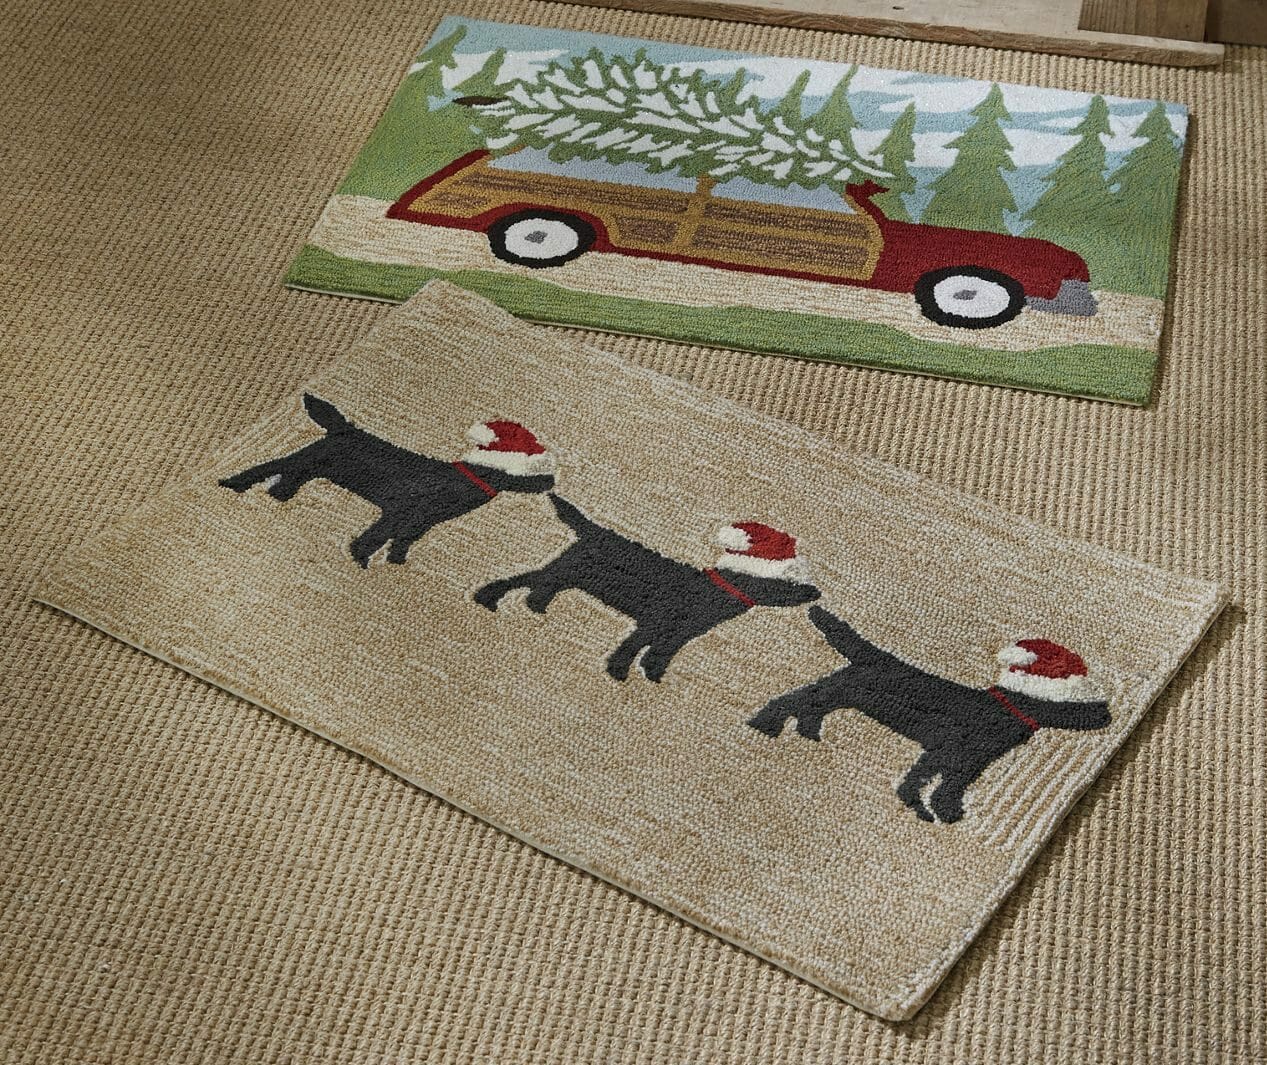 Two indoor/outdoor mats, one with a cut tree on top of a car, one with three black dogs wearing Santa hats.